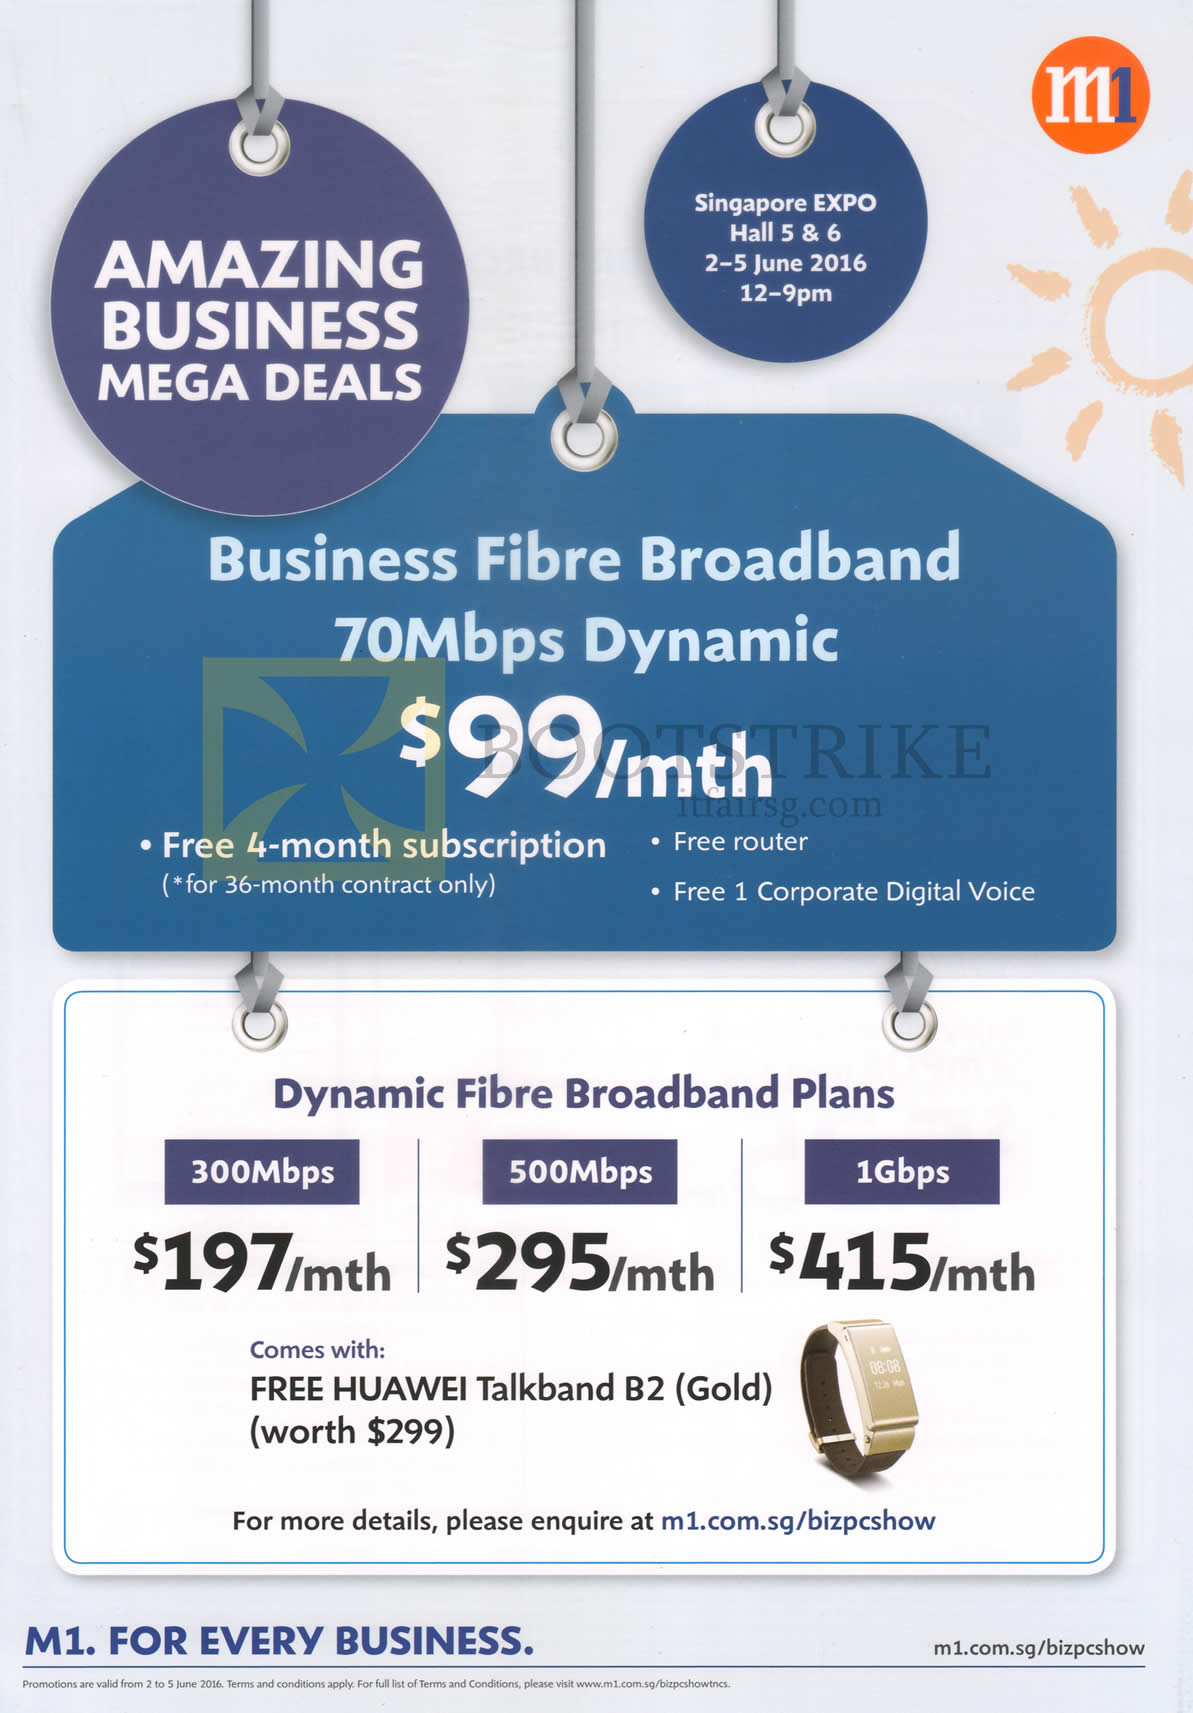 PC SHOW 2016 price list image brochure of M1 Business Dynamic Fibre Broadband 99.00 70Mbps, 197.00 300Mbps, 295.00 500Mbps, 415.00 1Gbps, Free Huawei Talkband B2